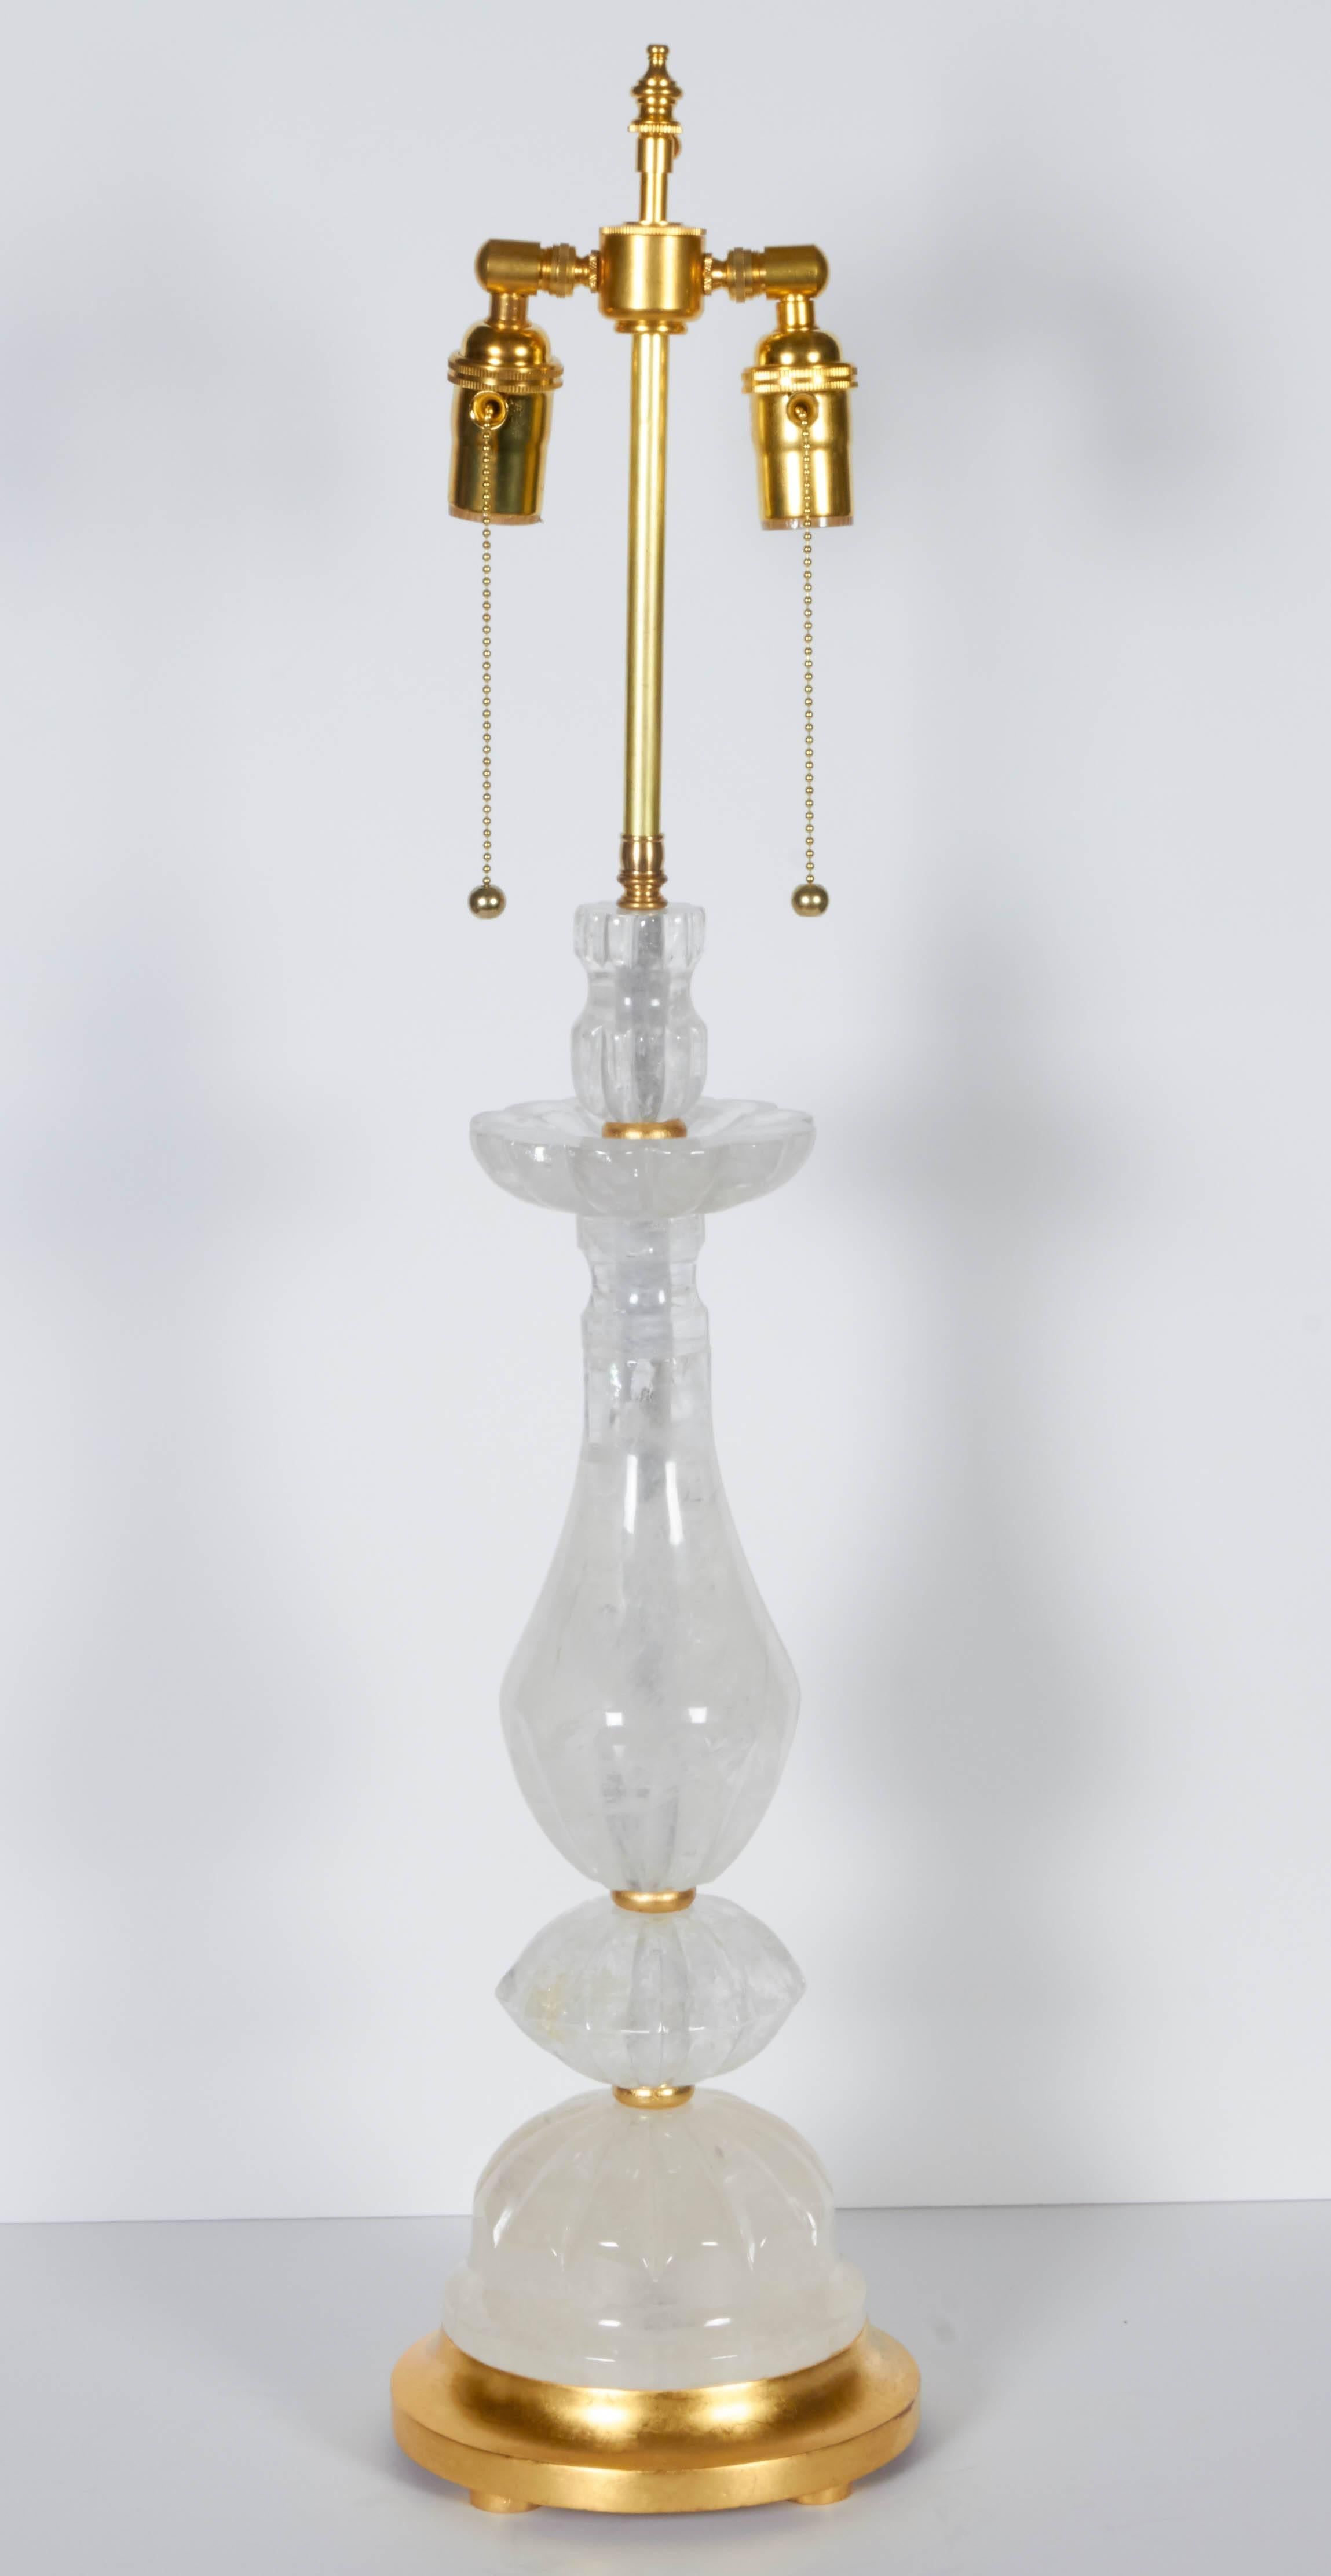 A pair of rock crystal table lamps, giltwood elements, double cluster fitting, wired for electricity.